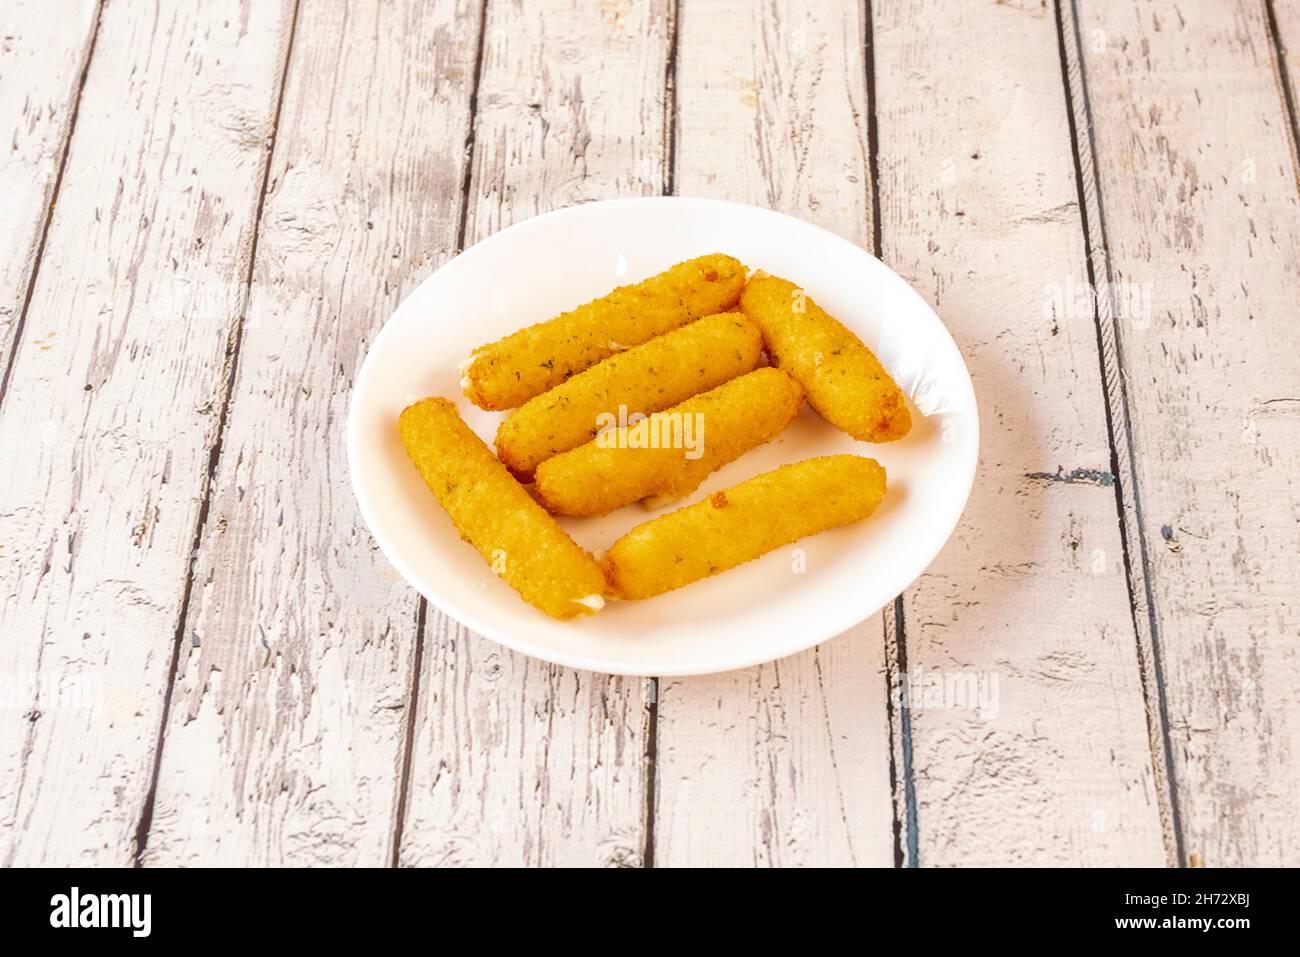 Mozzarella sticks are long pieces of mozzarella cheese that are battered or breaded and fried. Often served in restaurants as an aperitif Stock Photo